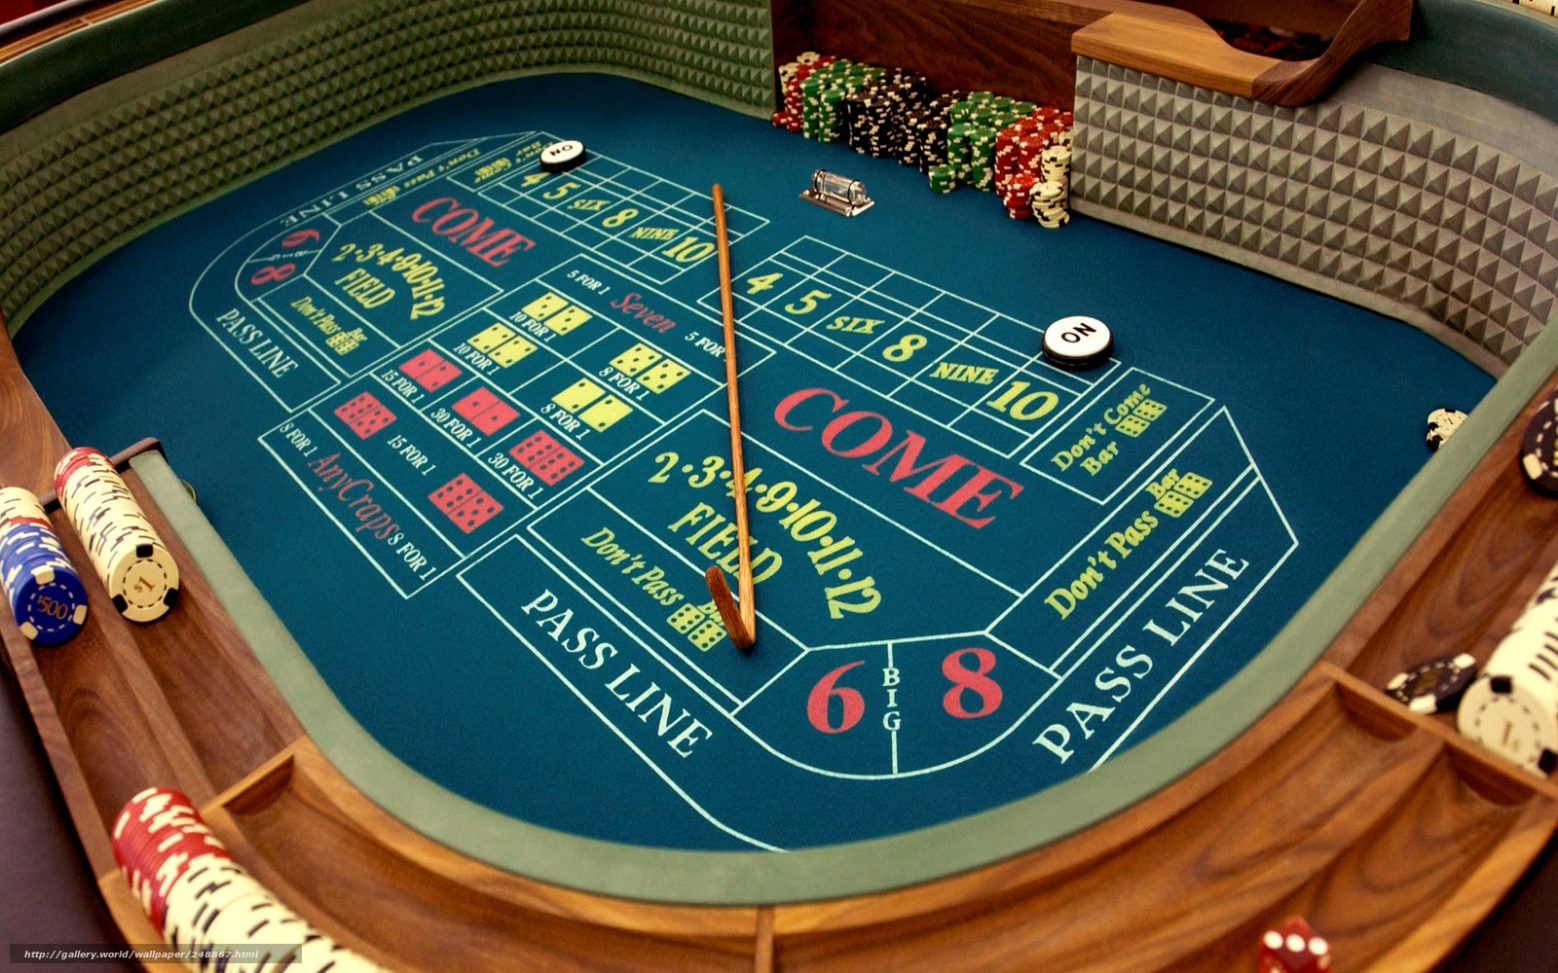 GENERAL RULES FOR PLAYING CRAPS